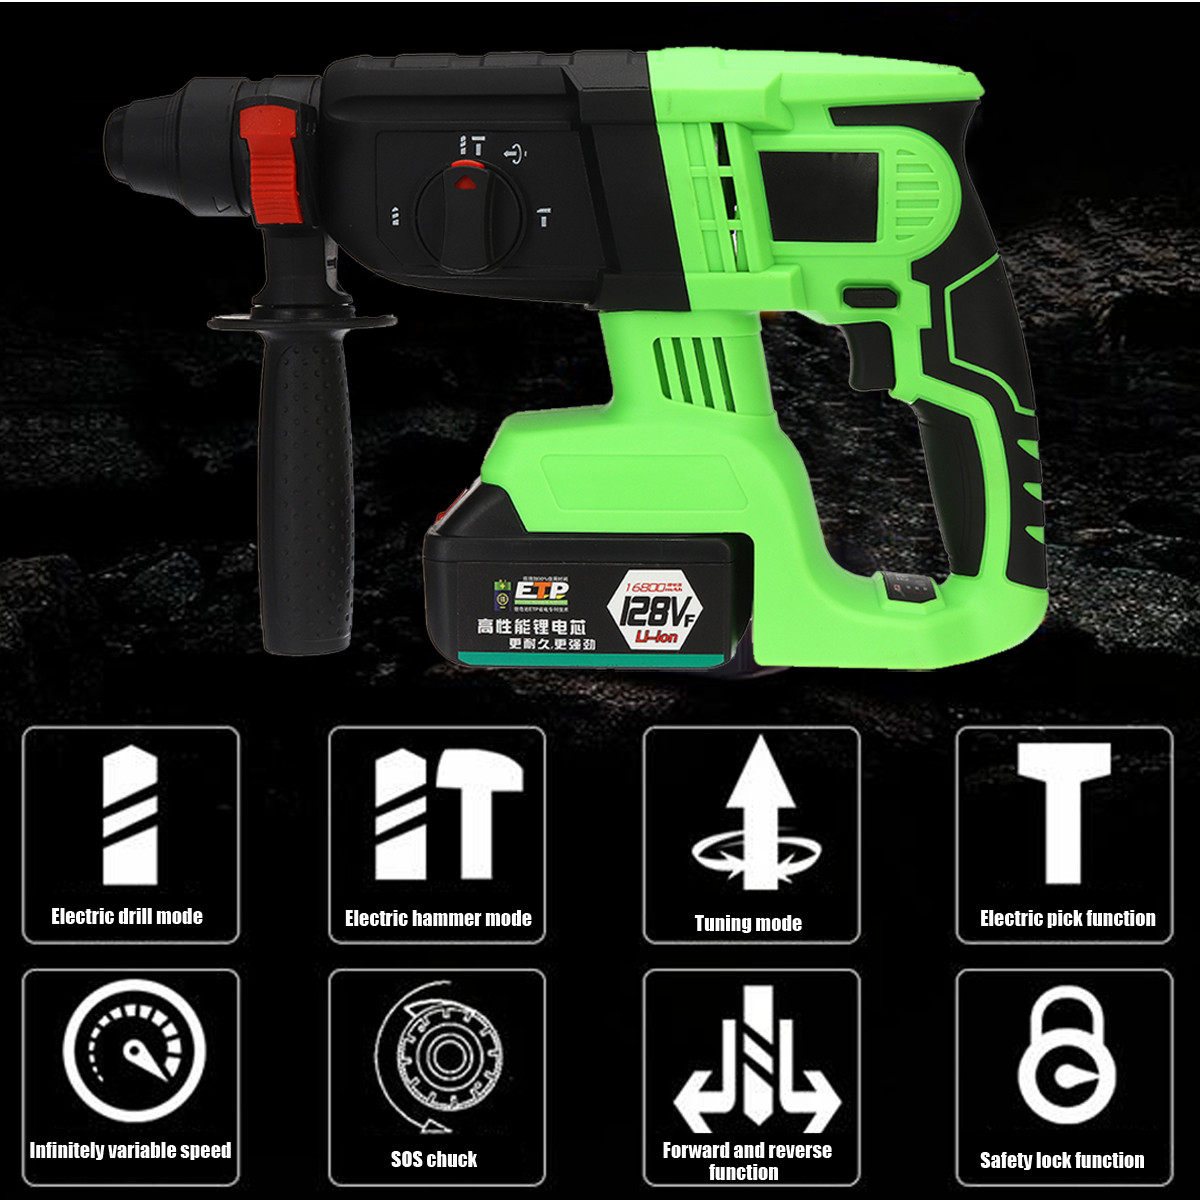 128VF-16800mAh-Brushless-Electric-Cordless-Impact-Hammer-High-Torque-Drill-with-Rechargeable-Battery-1522123-3